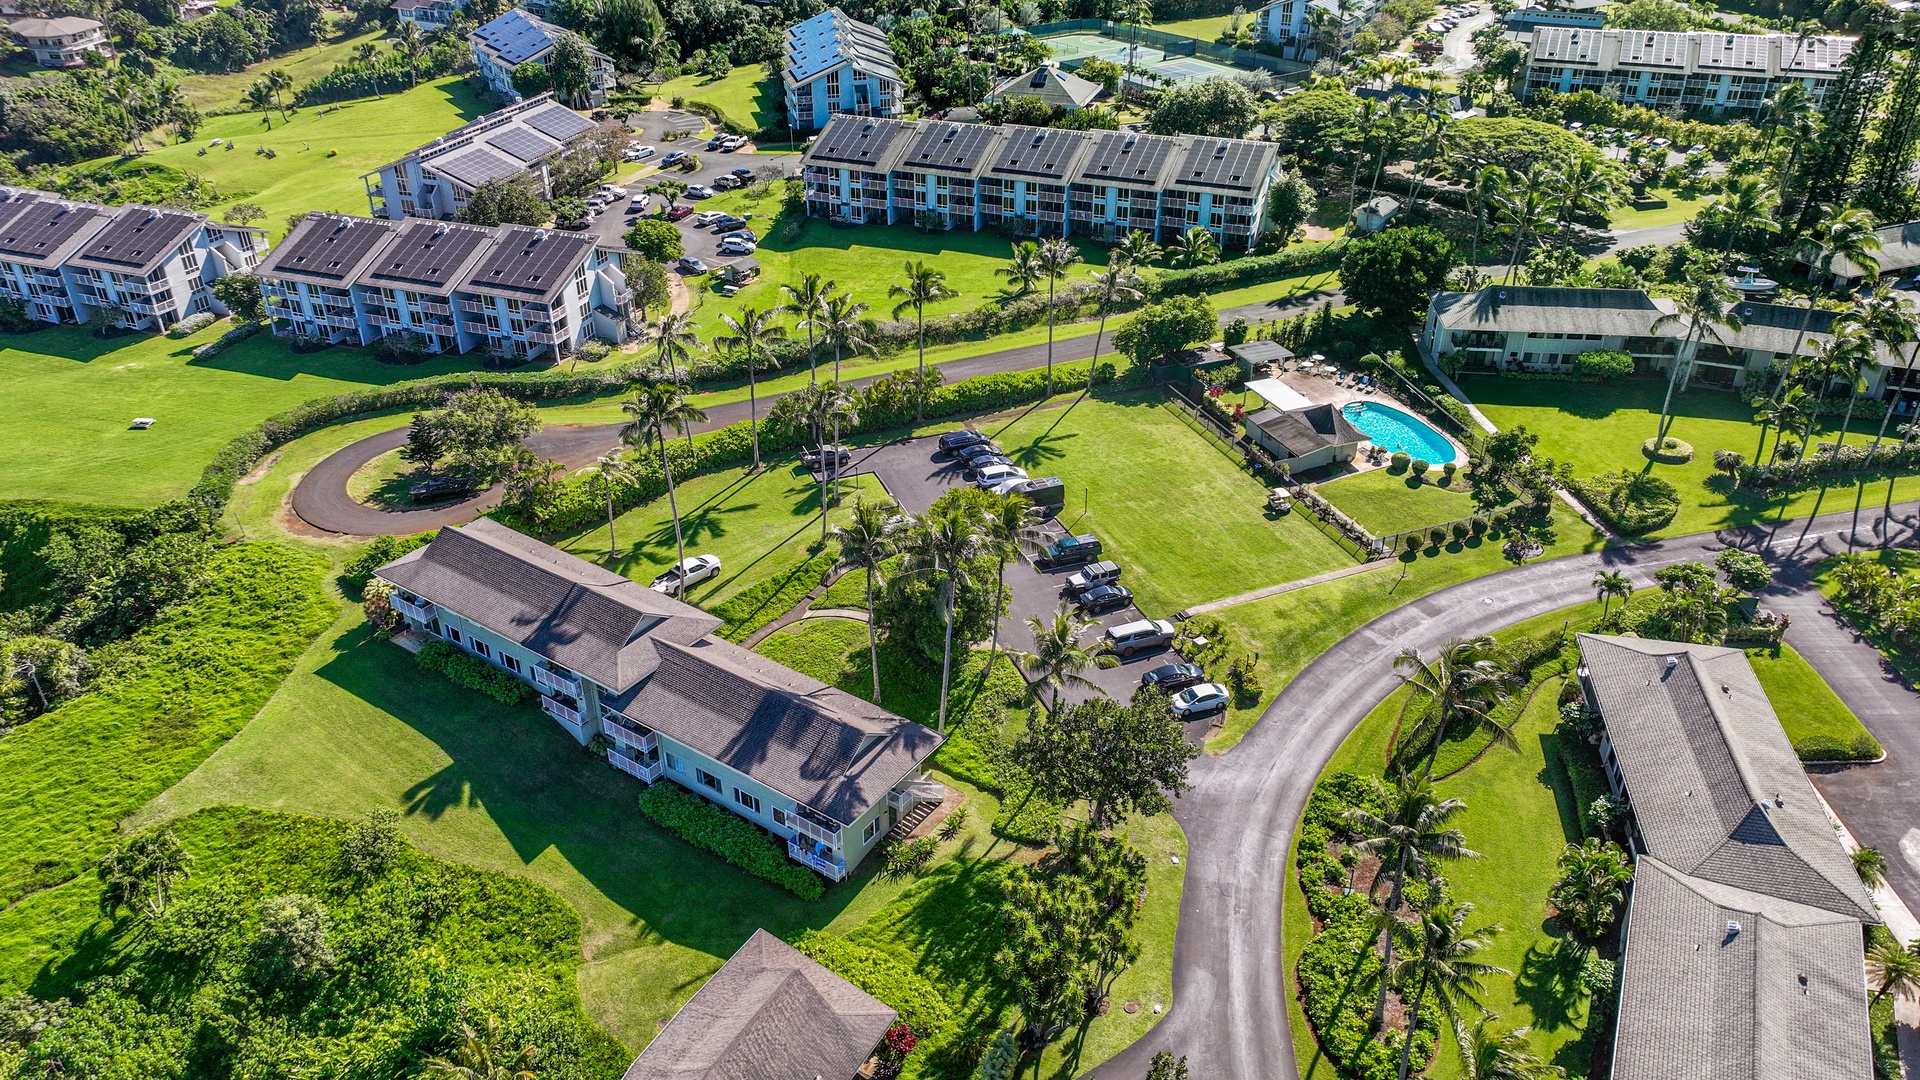 Princeville Vacation Rentals, Alii Kai 7201 - Parking options in front of the building.